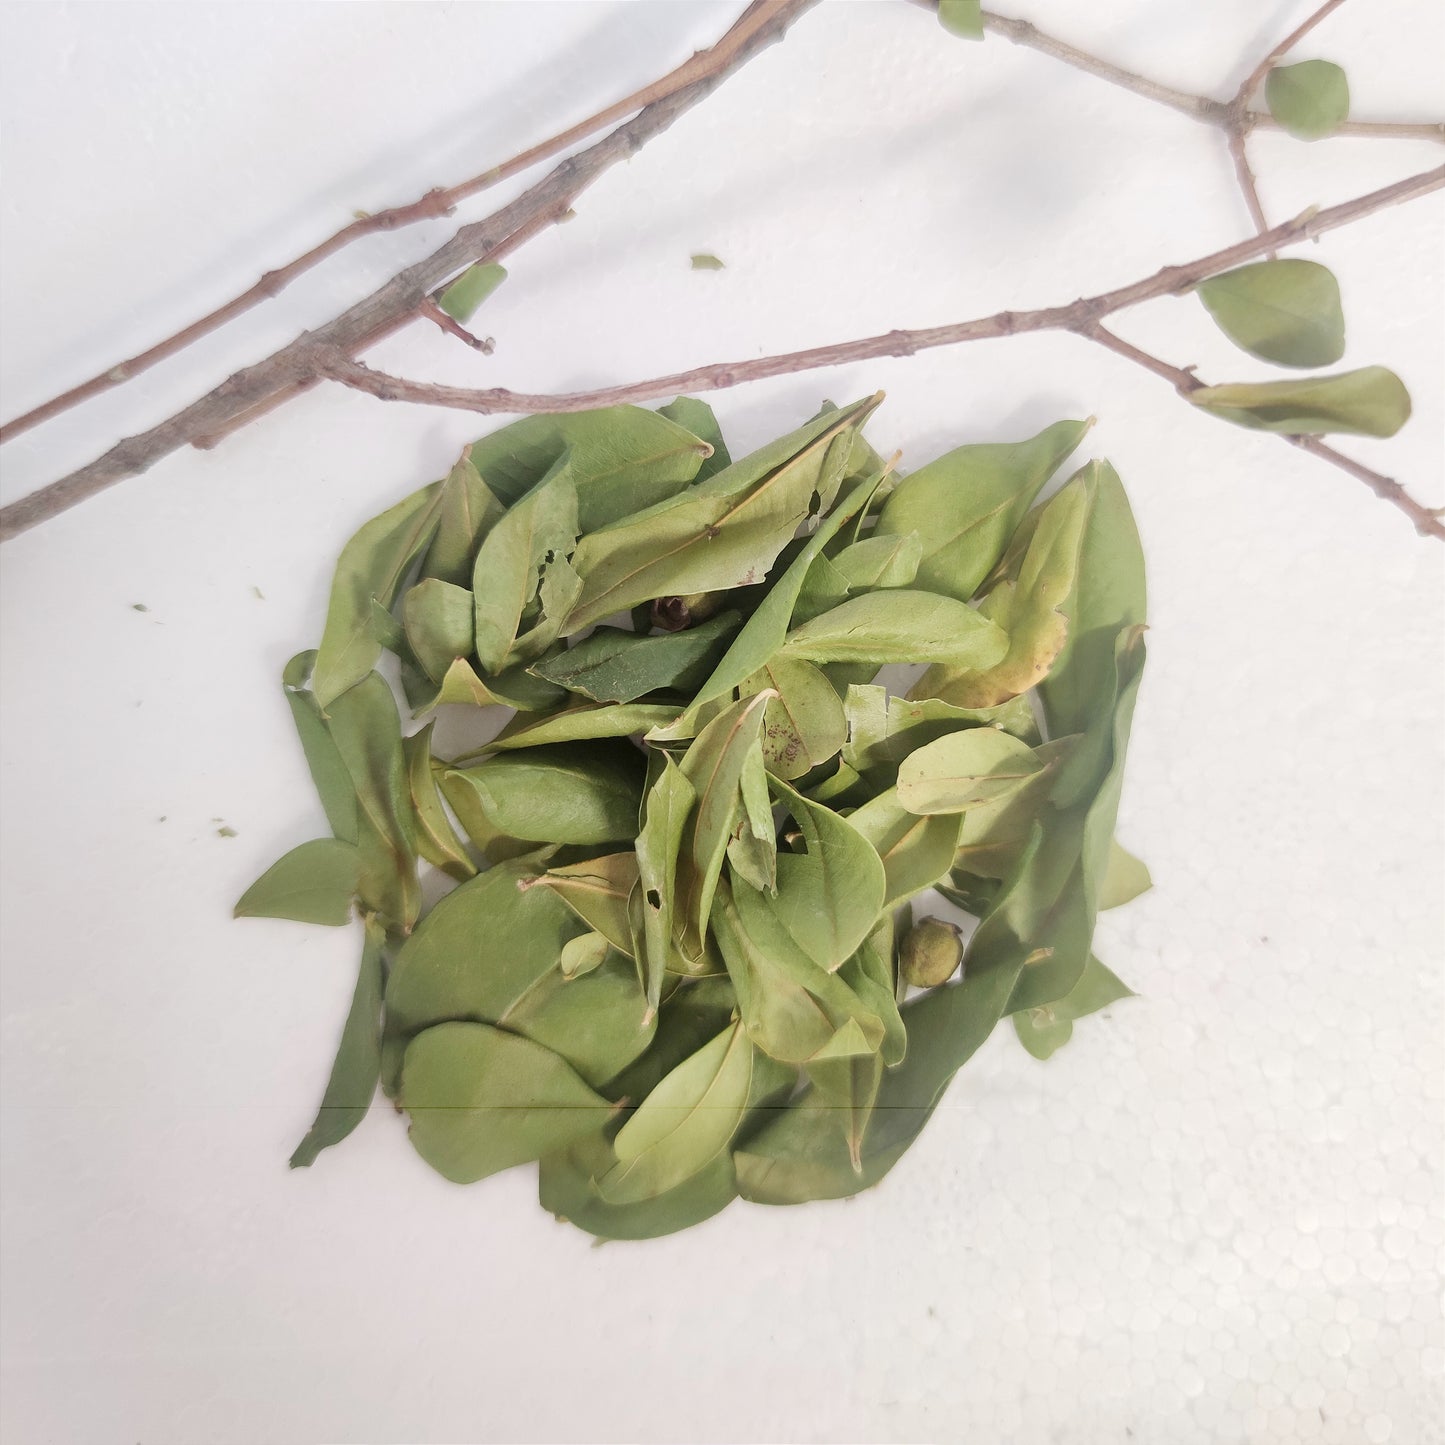 SELECTED DRIED MYRTLE LEAVES (LEAVES ONLY) 100 GRAMS